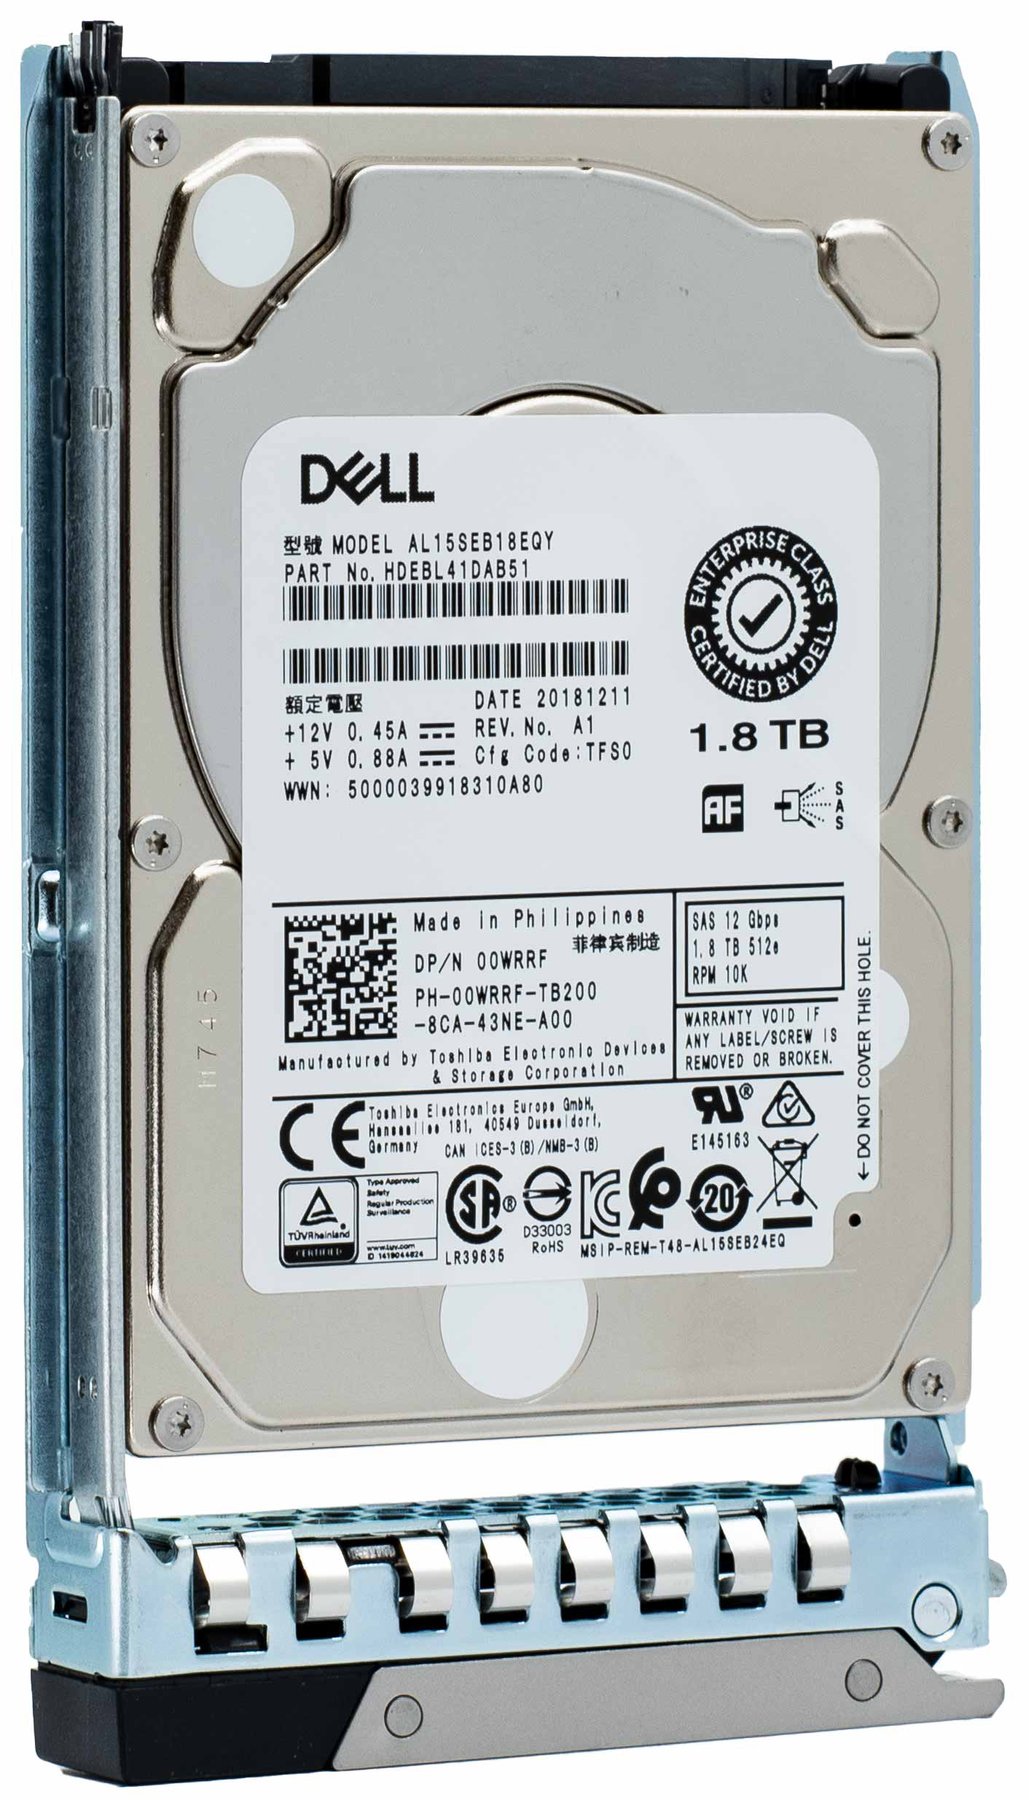 Dell G14 T8VMH 1.8TB 10K RPM SAS 12Gb/s 512e 2.5" Manufacturer Recertified HDD